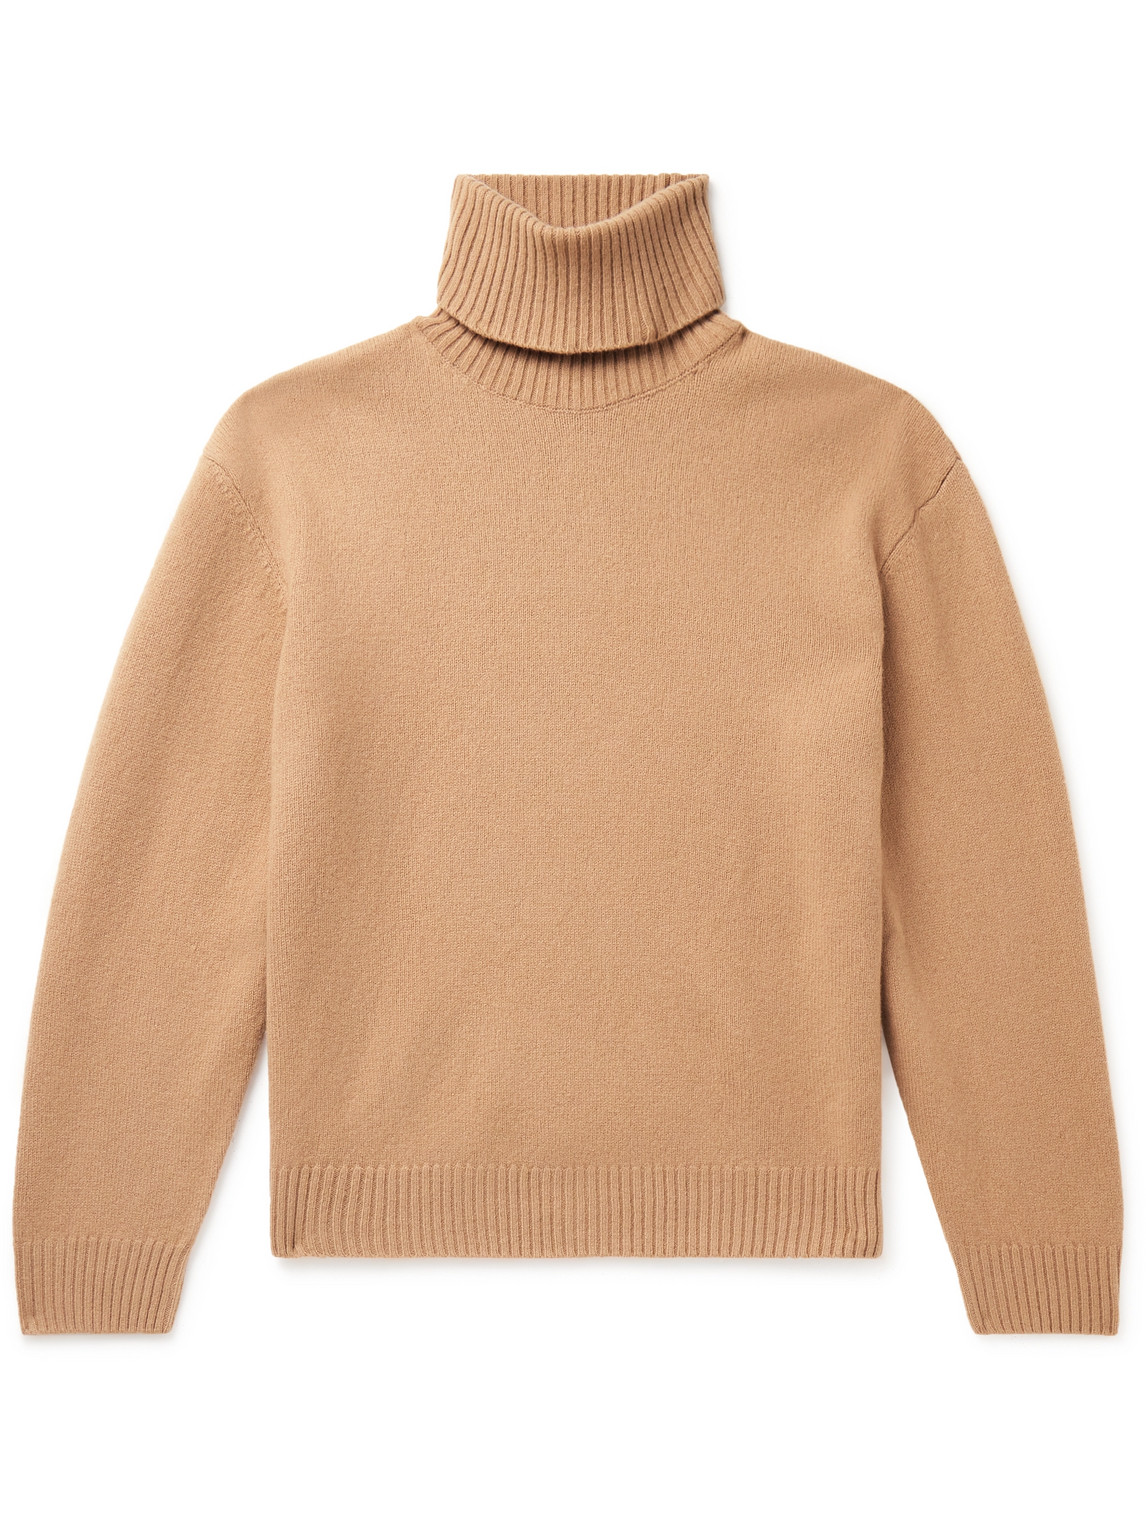 Marc Virgin Wool and Cashmere-Blend Rollneck Sweater